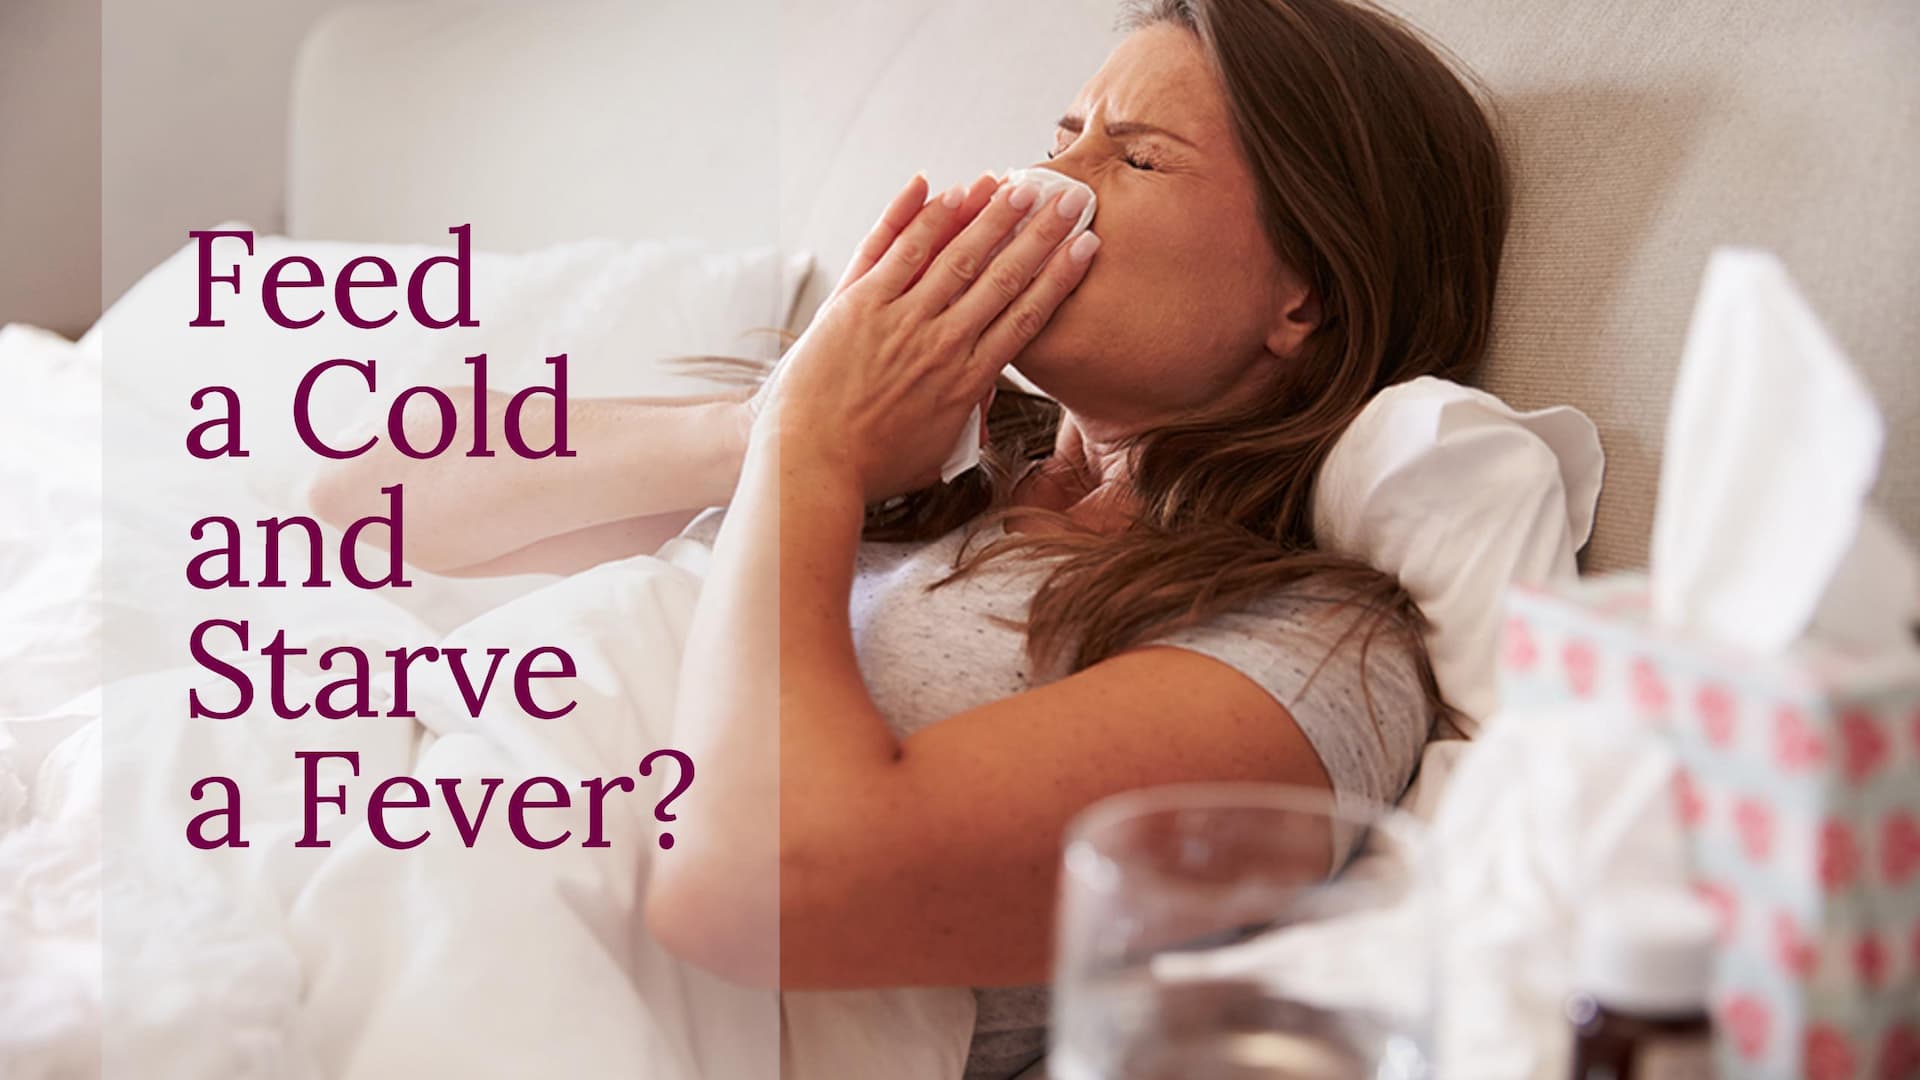 The Truth About Feeding a Cold and Starving a Fever